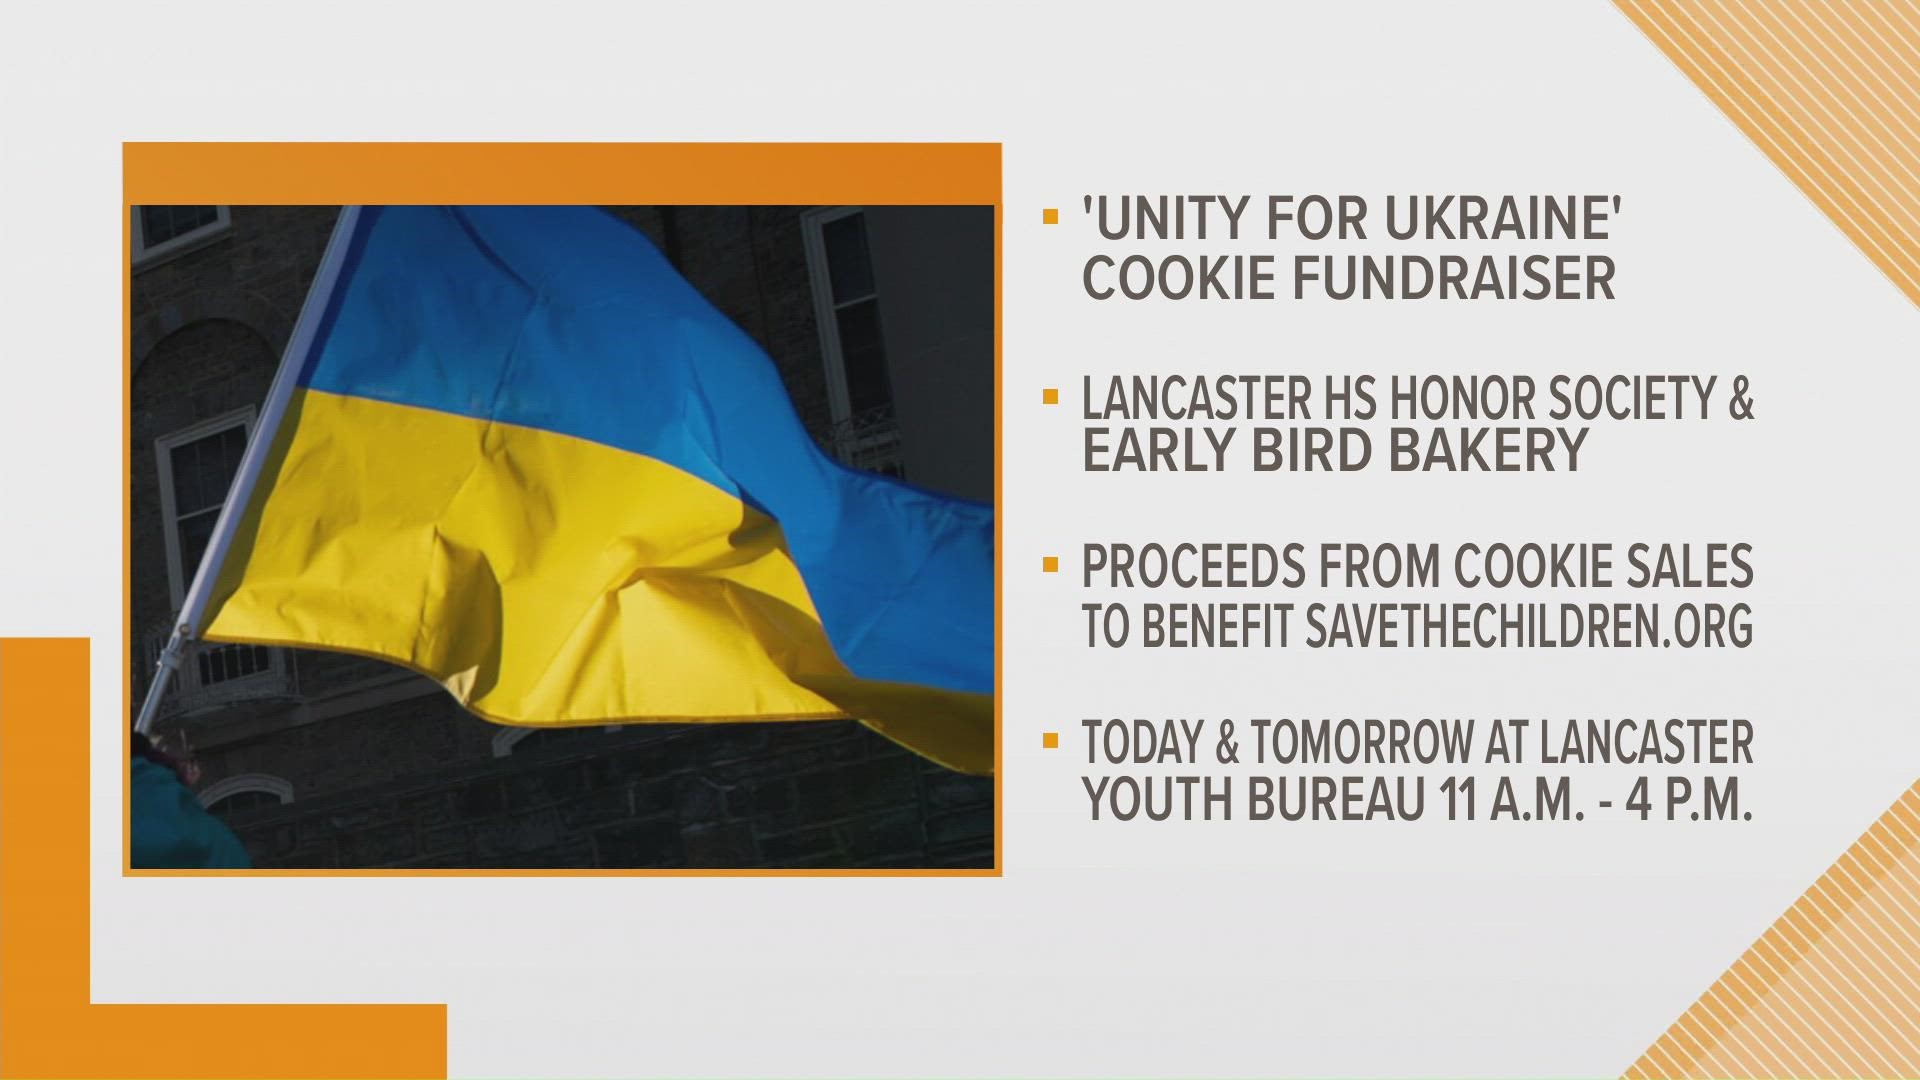 This weekend there is a "Unity for Ukraine" cookie drive happening at the Lancaster Youth Bureau.